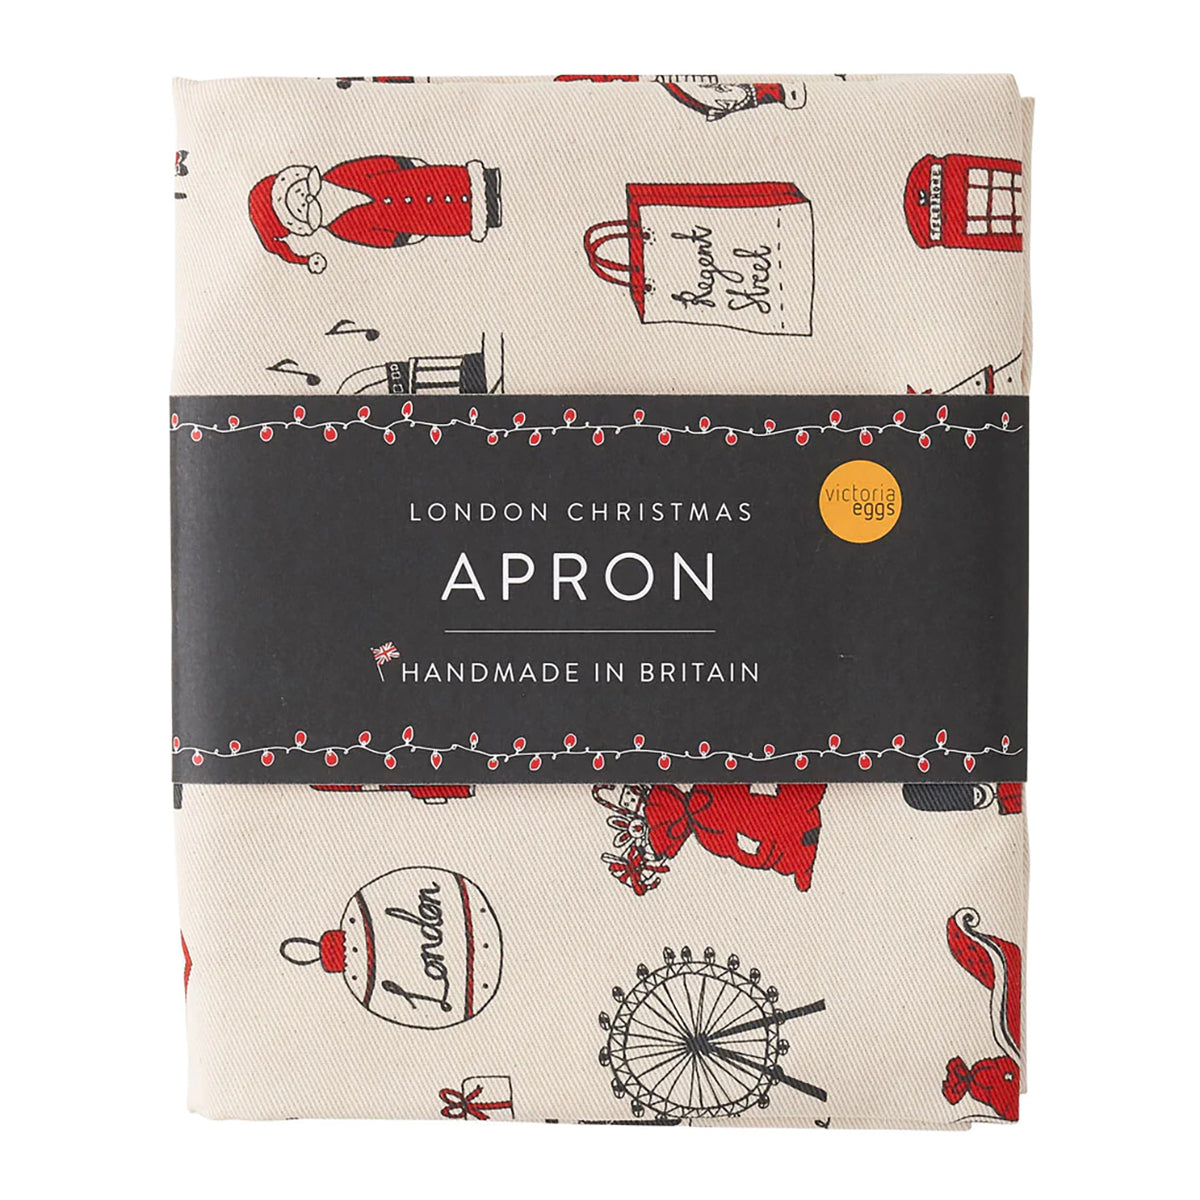 London Christmas Apron in packaging